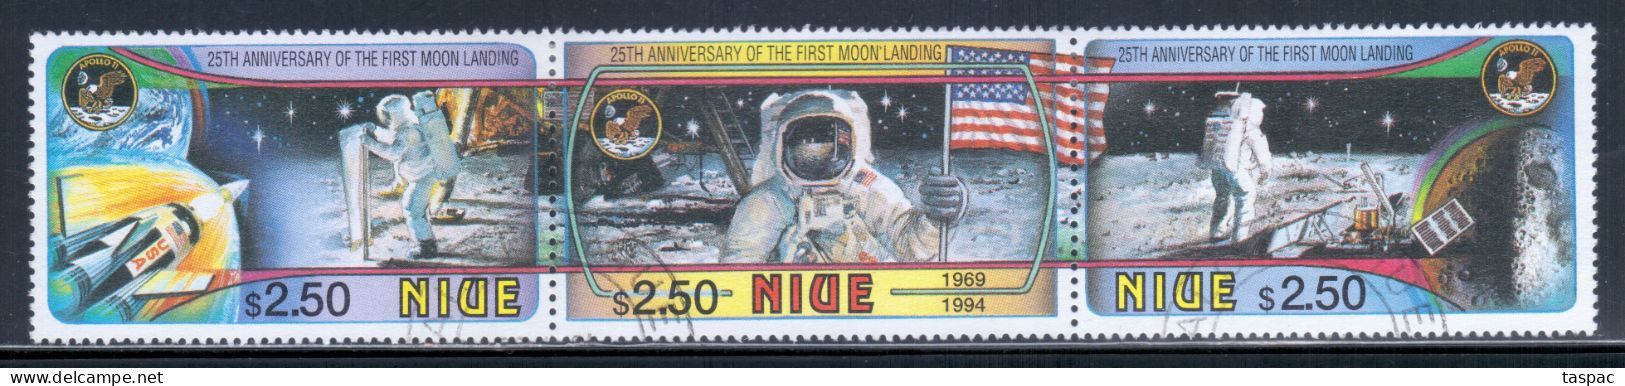 Niue 1994 Mi# 842-844 Used - Strip Of 3 - First Manned Moon Landing, 25th Anniv. / Space - Oceania